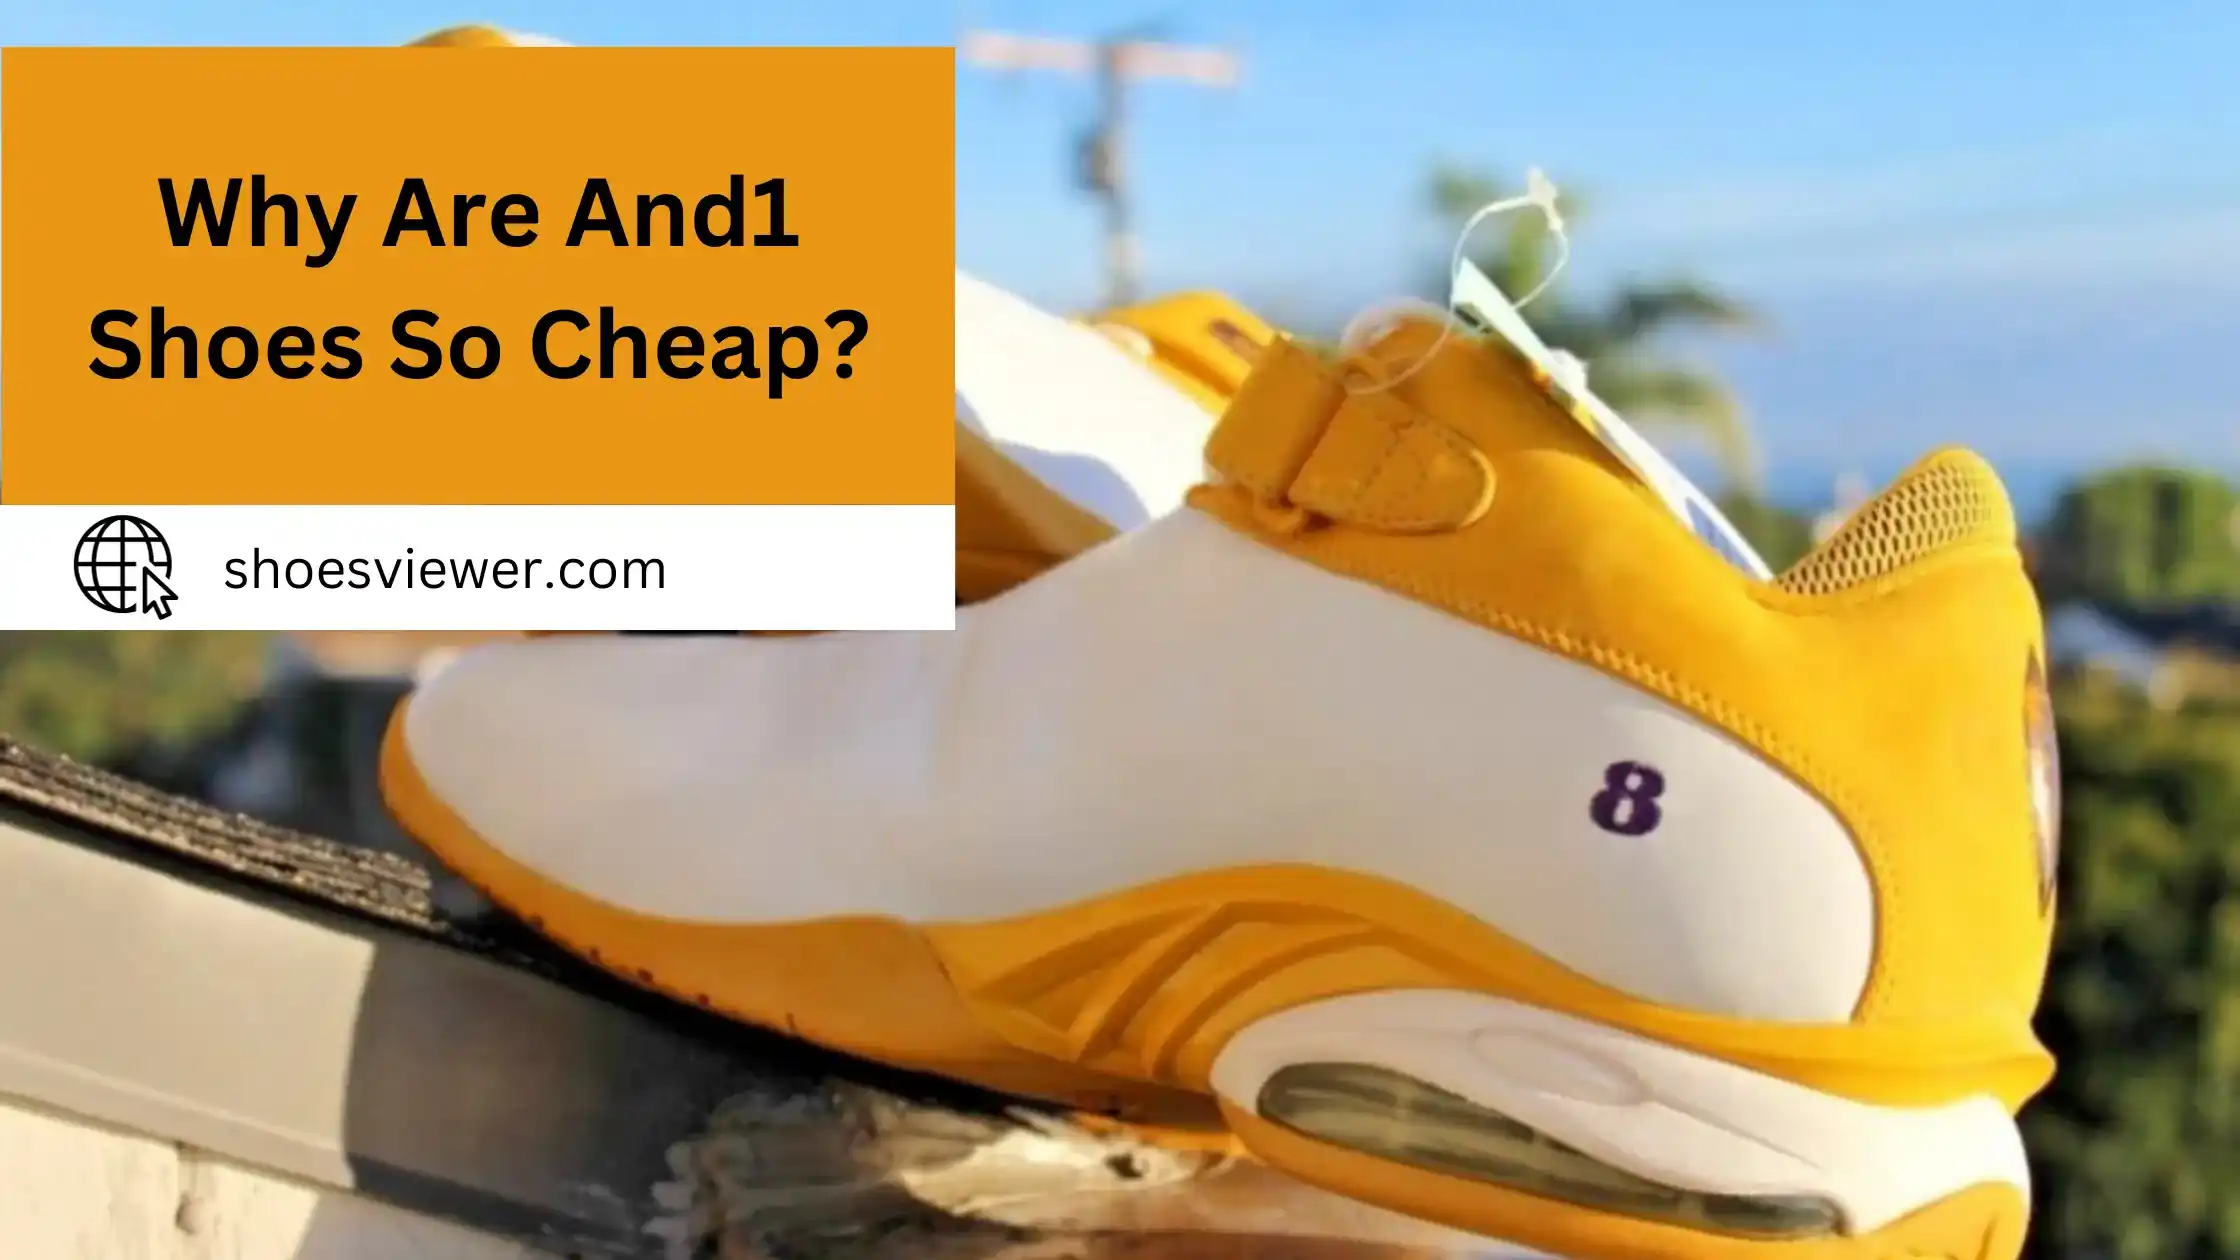 Why Are And1 Shoes So Cheap? Expert Pro Tips